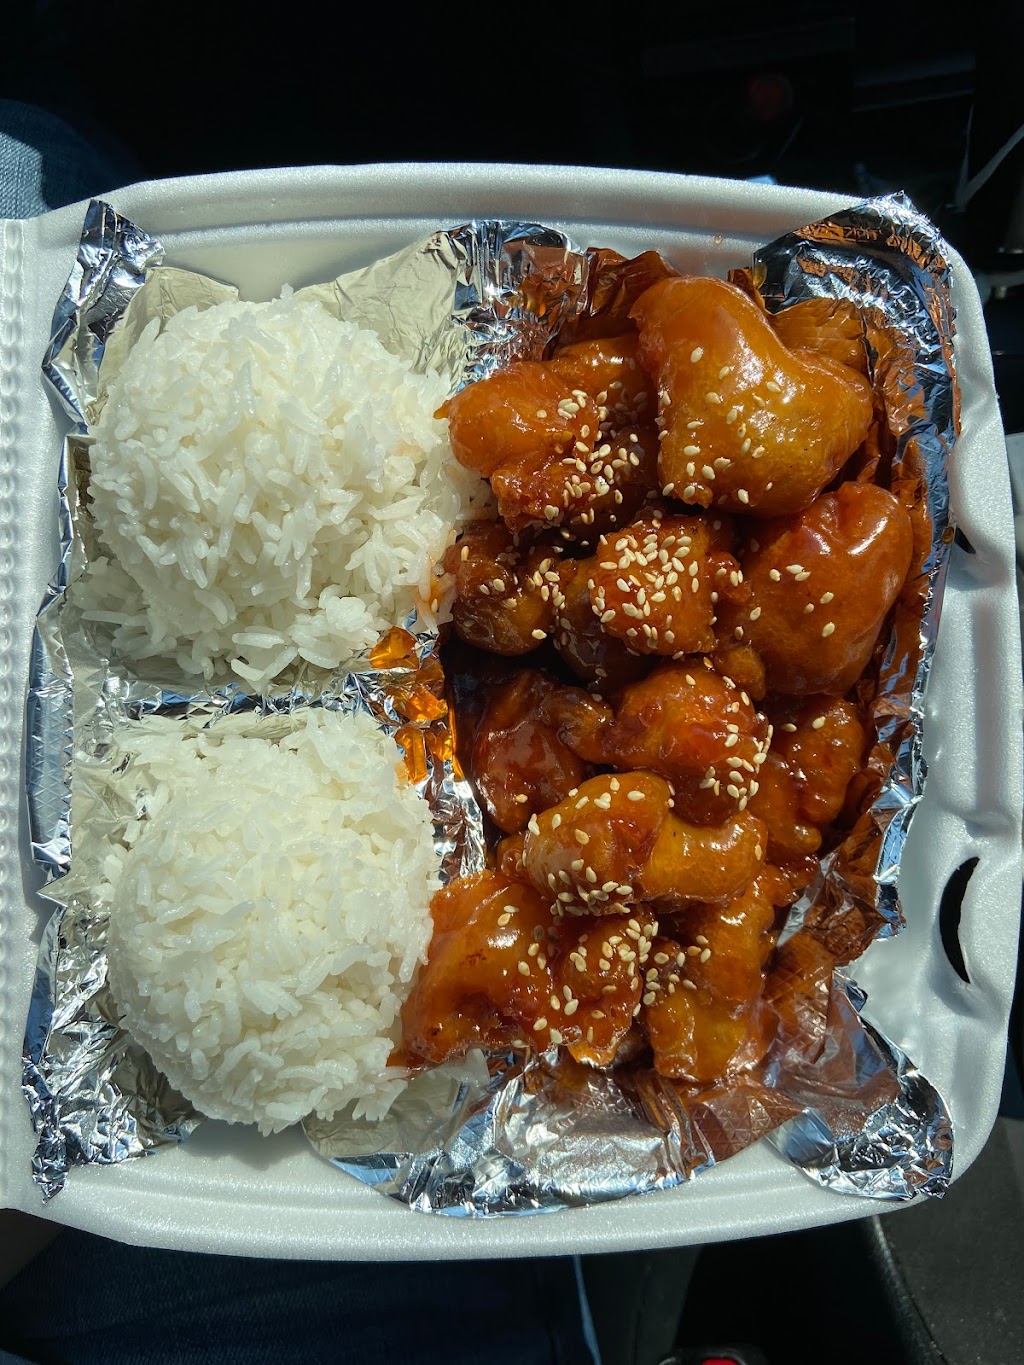 Golden Star Chinese Food | 1565 Cliff Rd # 3, Eagan, MN 55122 | Phone: (651) 683-1185